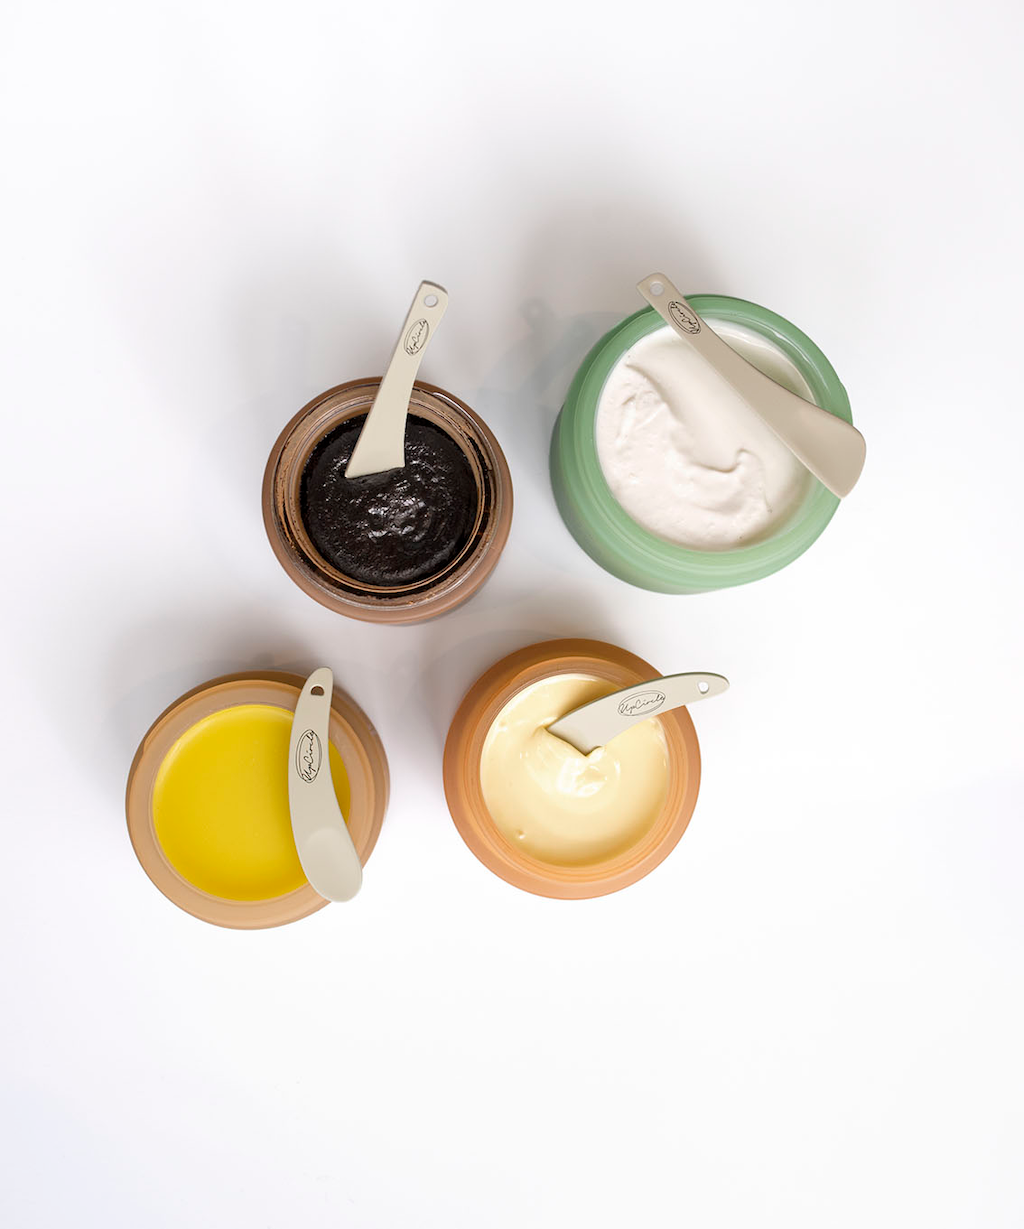 Upcircle Cosmetic Spatulas. Plastic free skincare. Four pots of Upcircle products are pictured open from the top with spatulas in or on top of them.